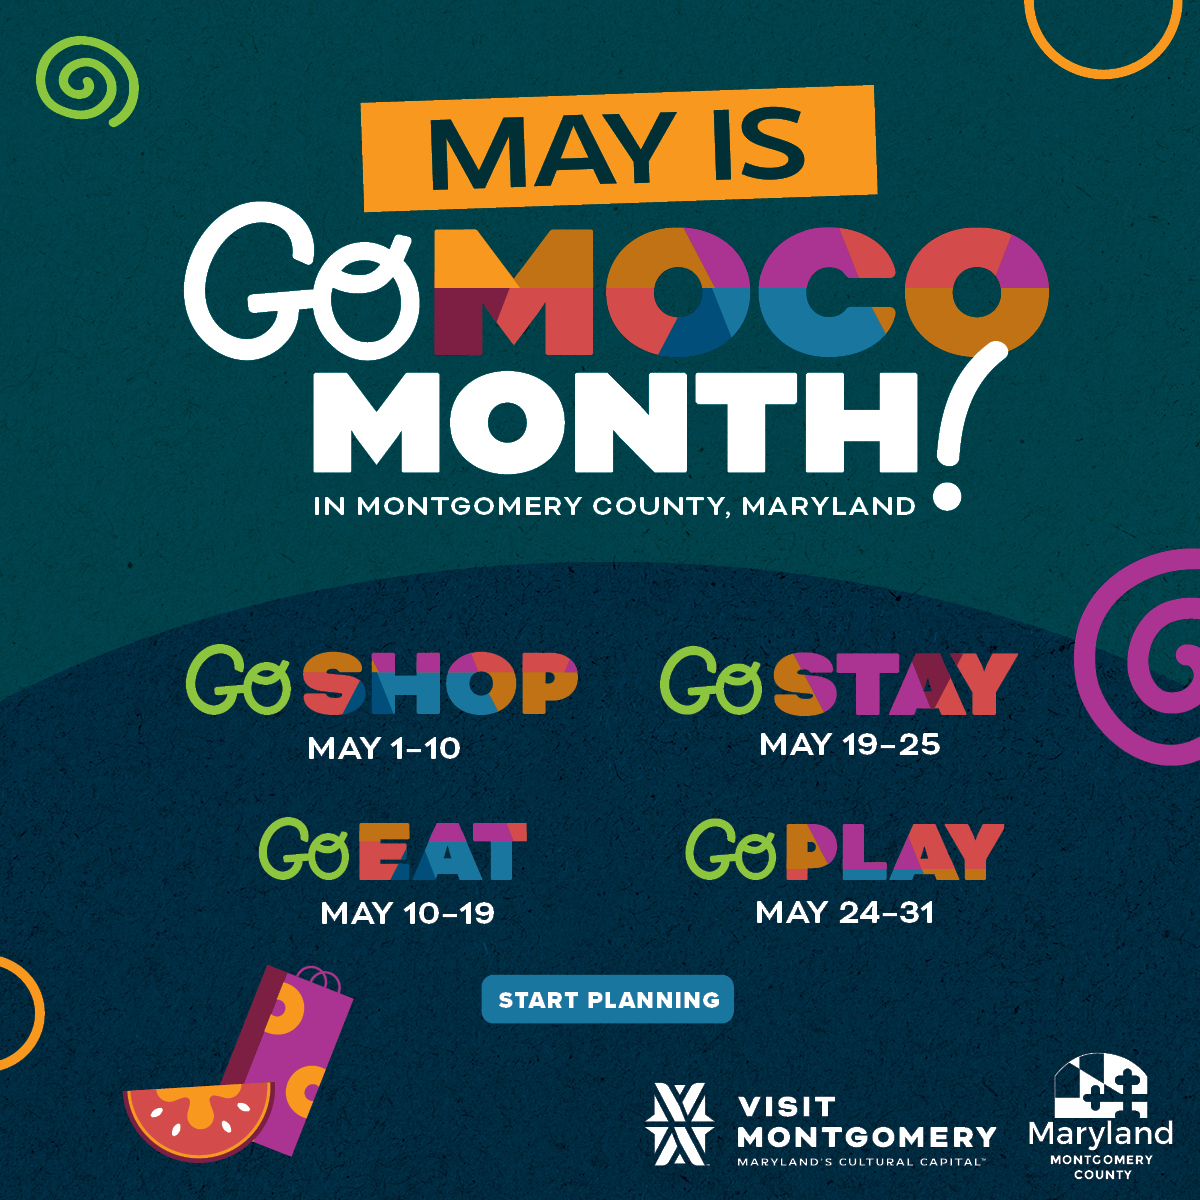 🚀 MOCO’S KICKOFF TO SUMMER

@VisitMoco #GoMoCoMonth celebrates small businesses all month long! Enjoy deals & events at hotels, restaurants, attractions & more

Week 4 ➡️ check-in with the Go Play digital passport to enter the Go MoCo Ultimate Giveaway
thelistareyouonit.com/buzz/lets-go-m…